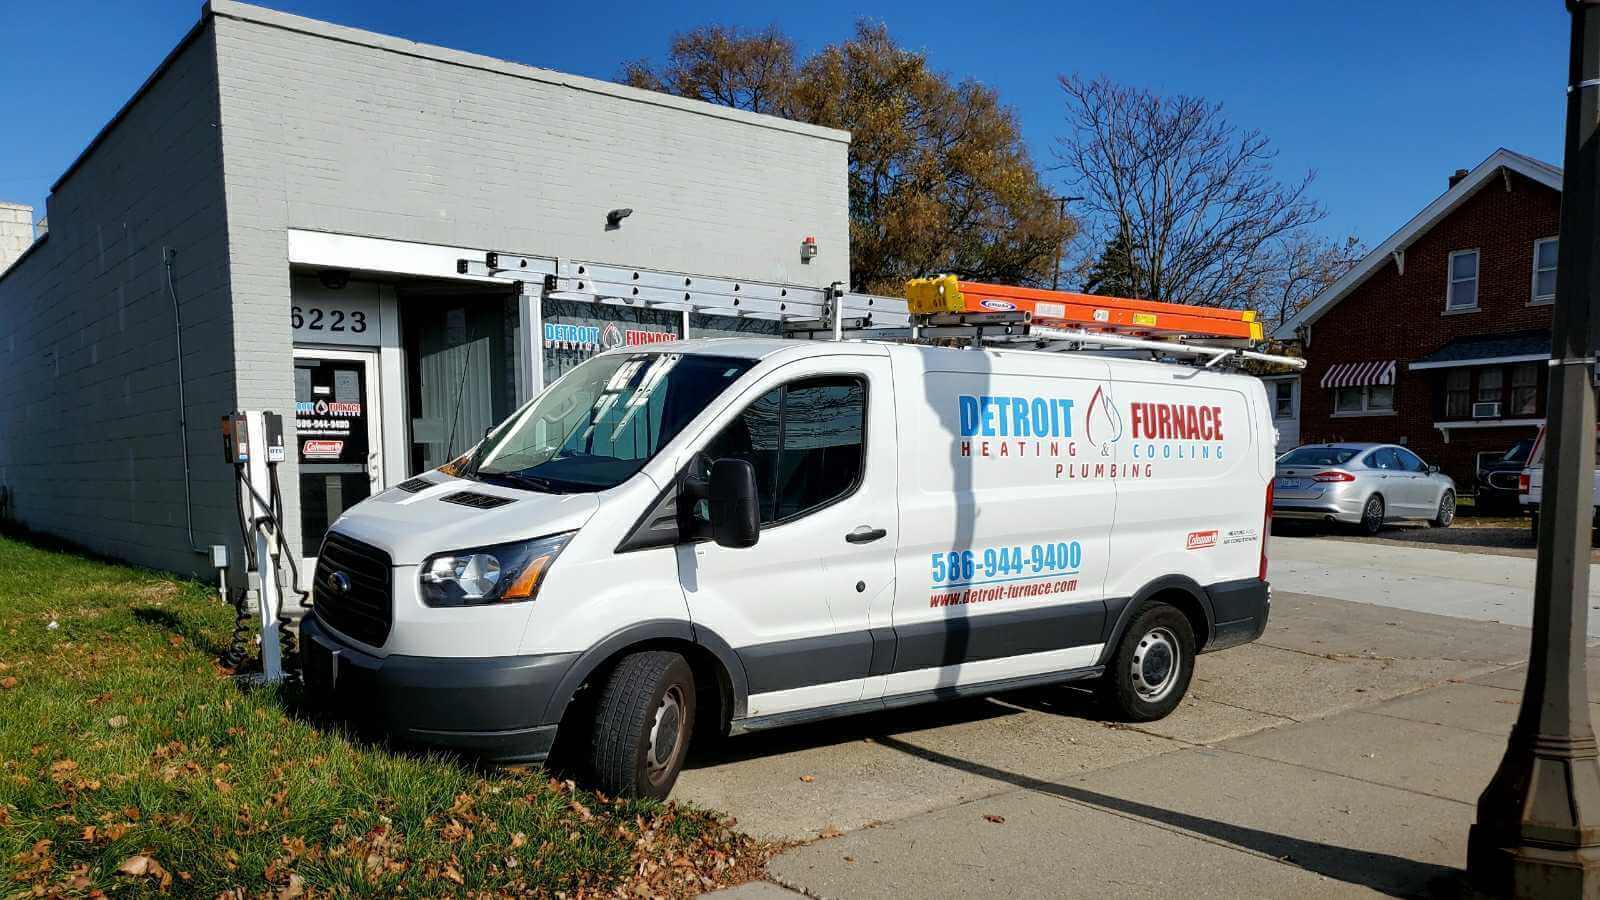 If you see our truck parked out front, you know you're at the right place for great HVAC work.